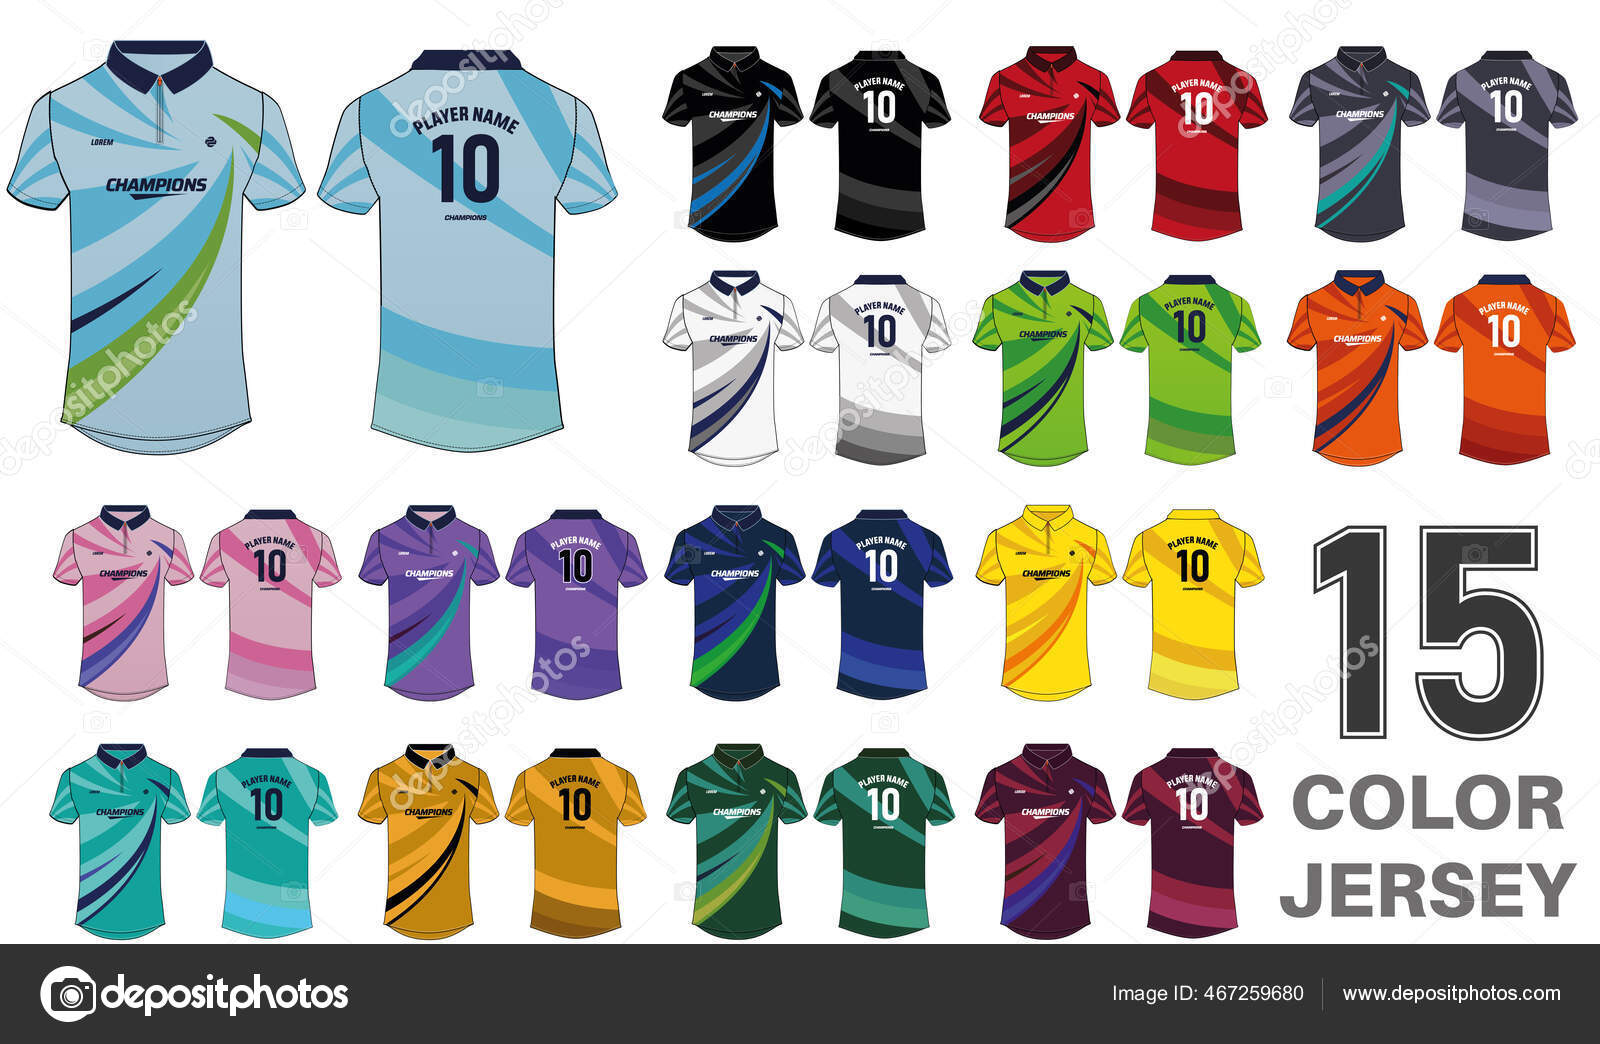 Design For Your Sports Jersey Upwork | lupon.gov.ph